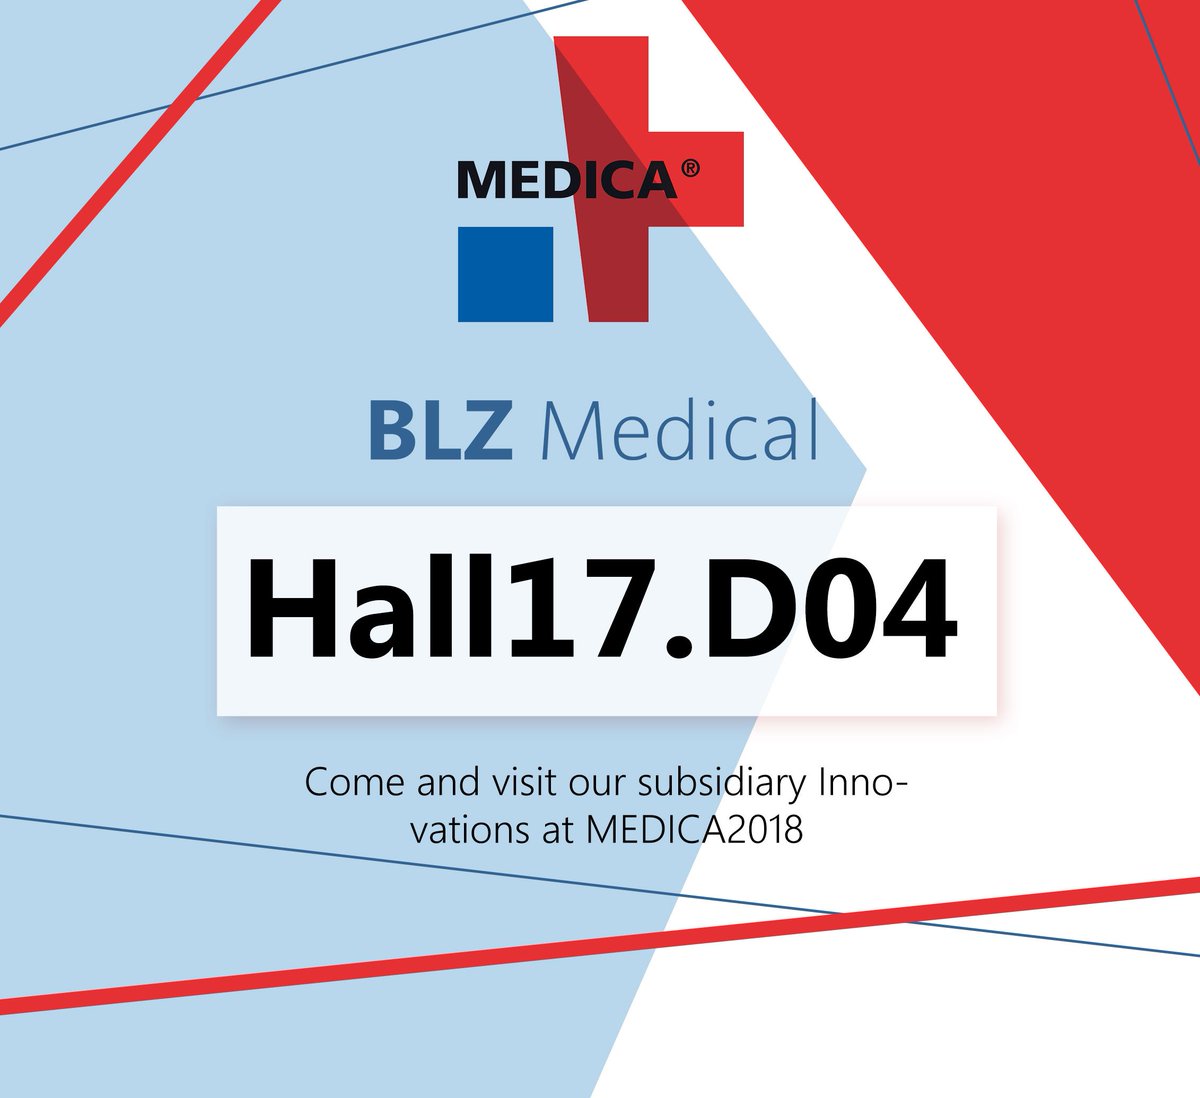 We'll be at @MEDICATradeFair in Düsseldorf from 12-15 November. Drop by and say hello, we'll be at Hall17.D04. Let us know if you have any questions. learn more in our website: veinsight.com/en #medica2018 #Medica #medicalsupplies